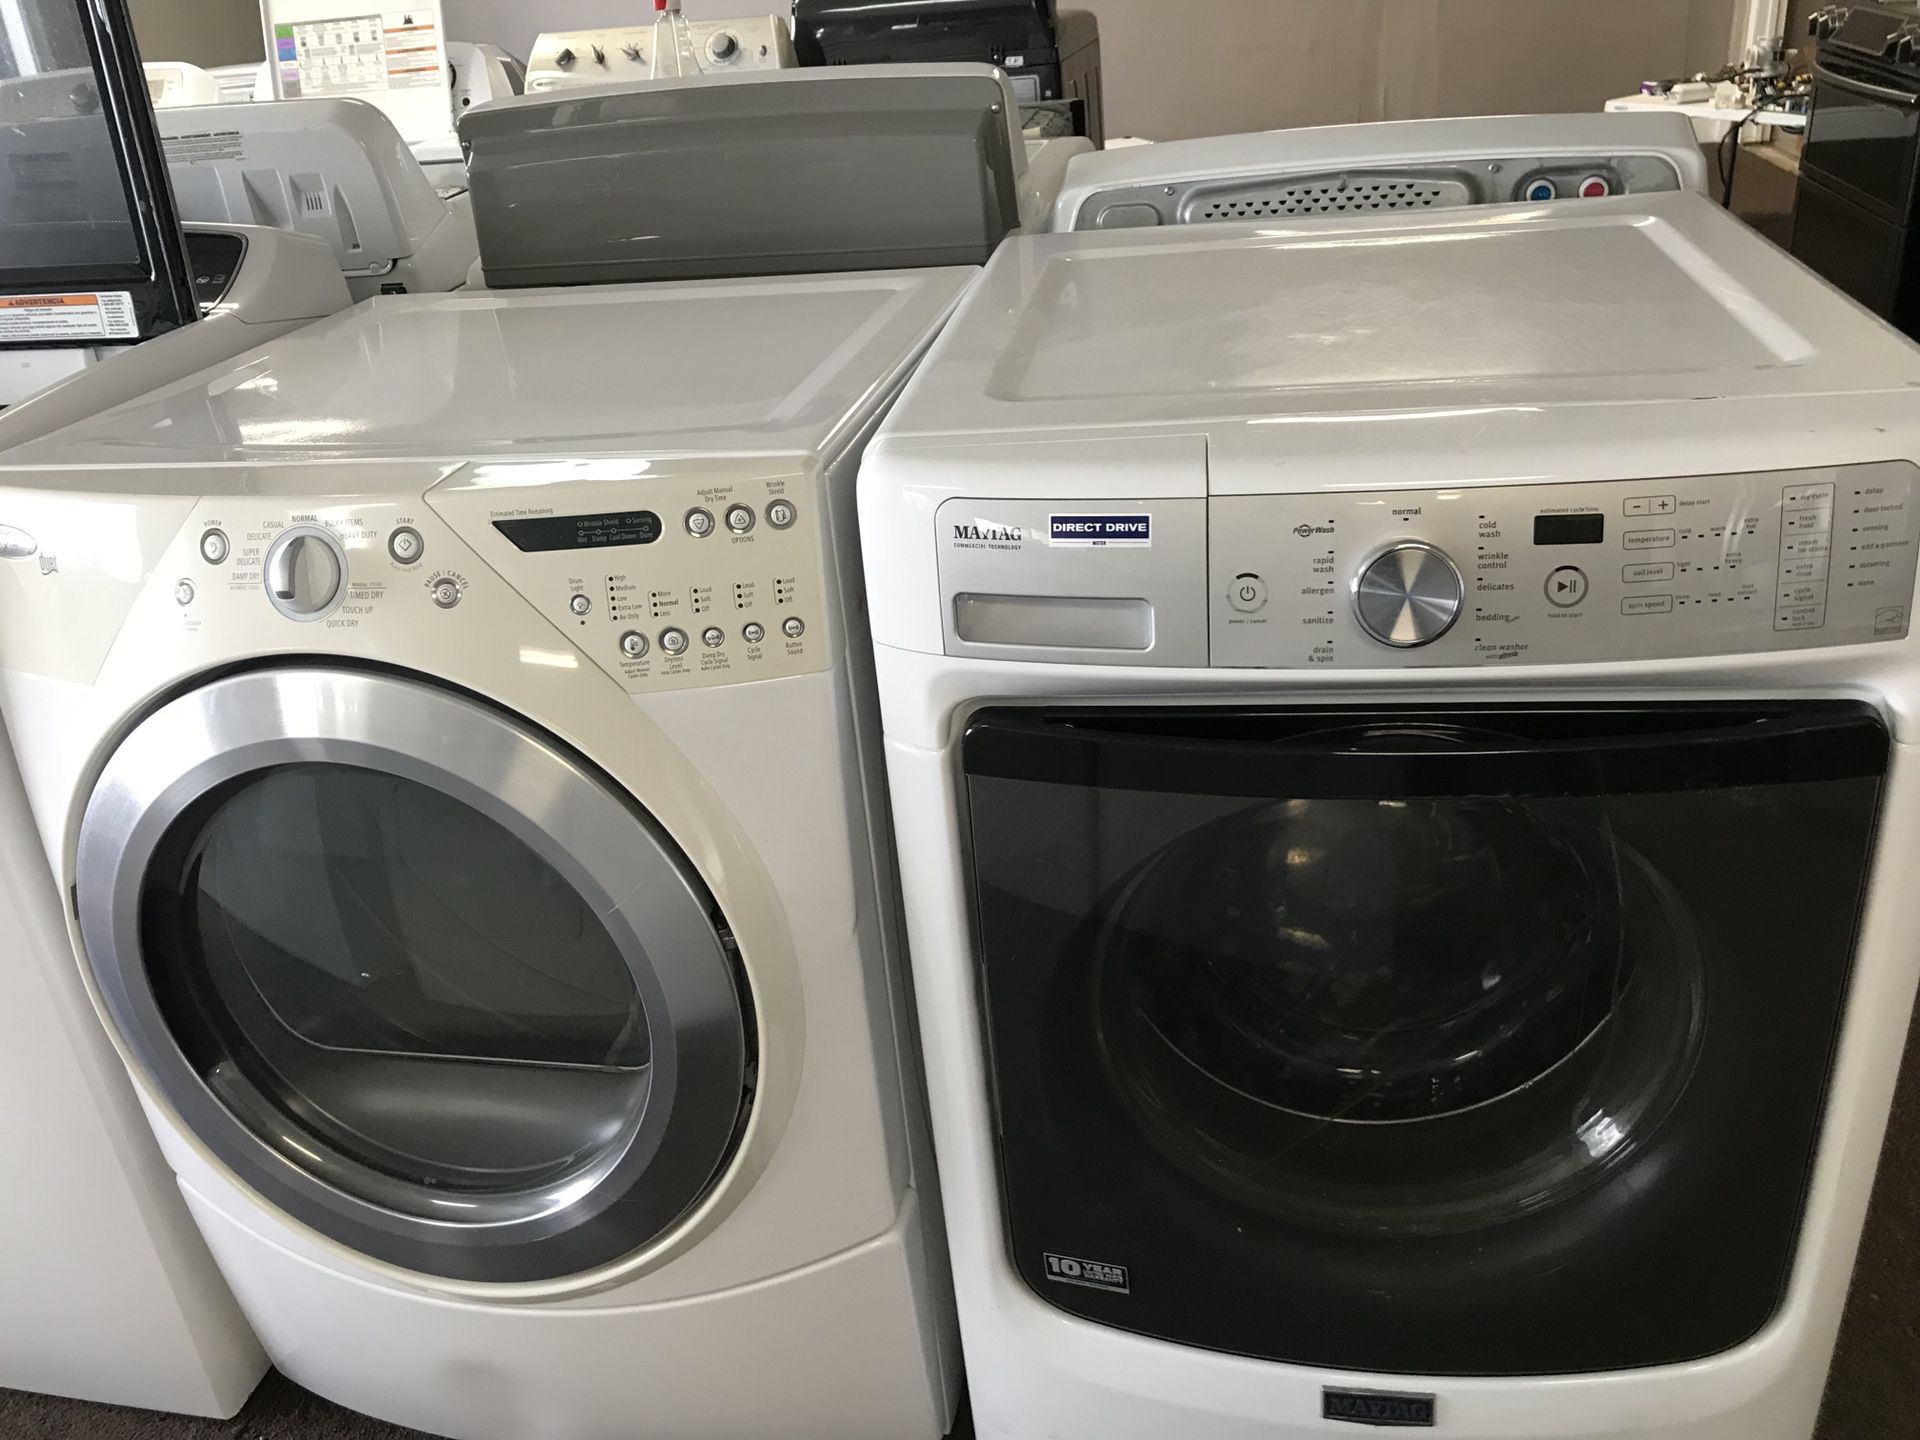 Whirlpool Maytag Front Loader Washer Dryer Set!! Like new!!